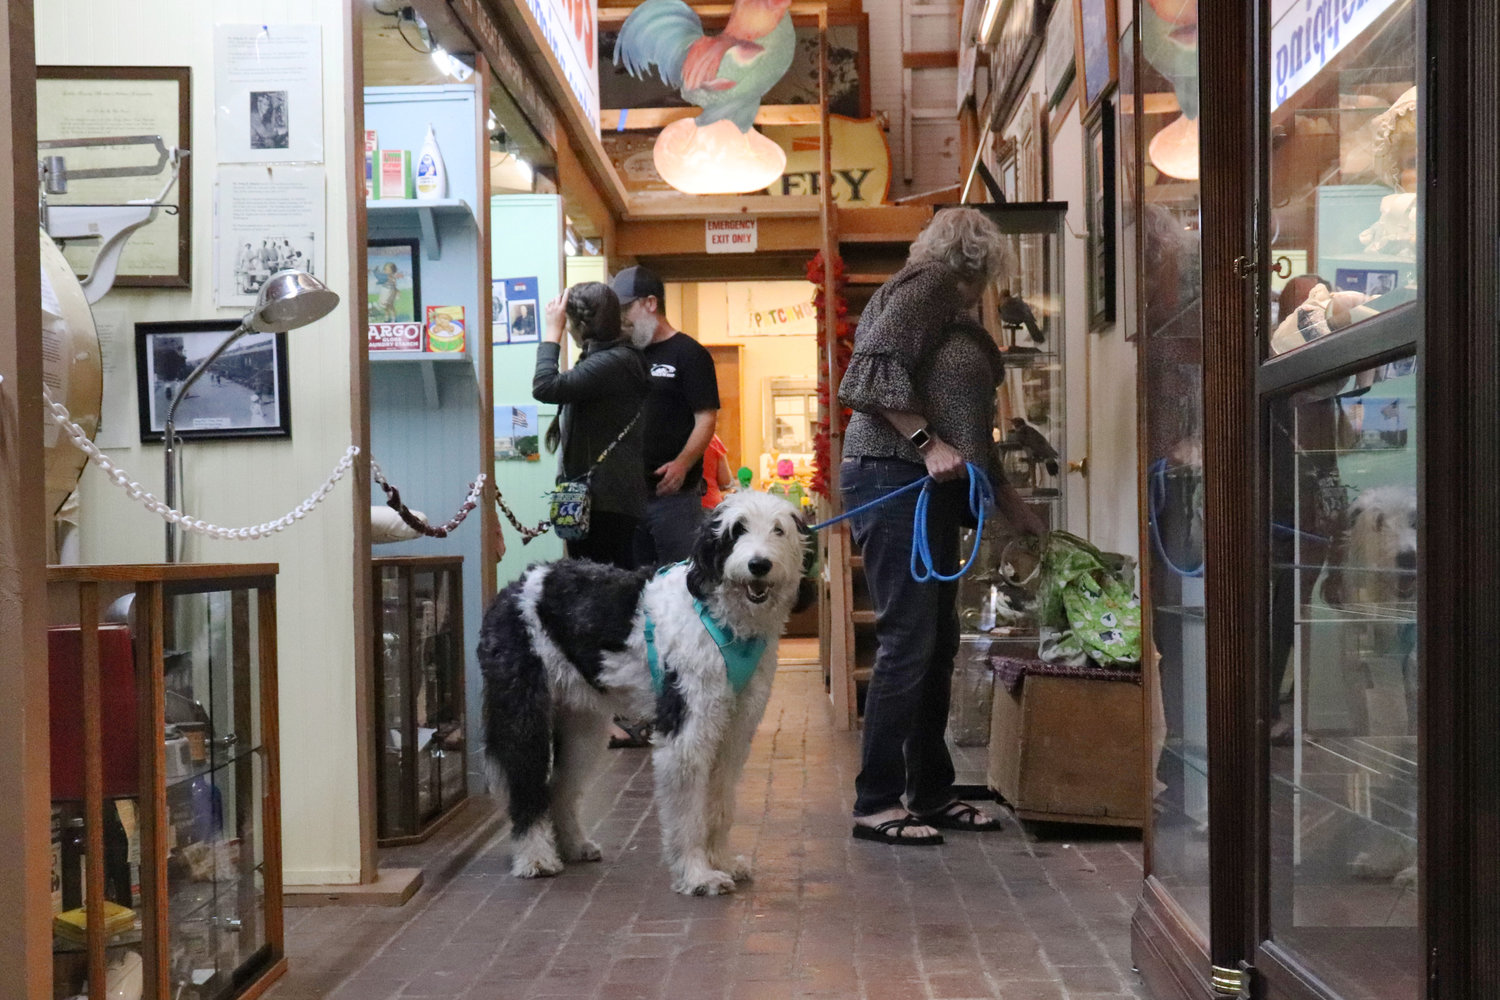 Amy Danielson takes her dog, Olaf, through the Lewis County Historical Museum during the Chehalis Flying Saucer Party on Saturday.